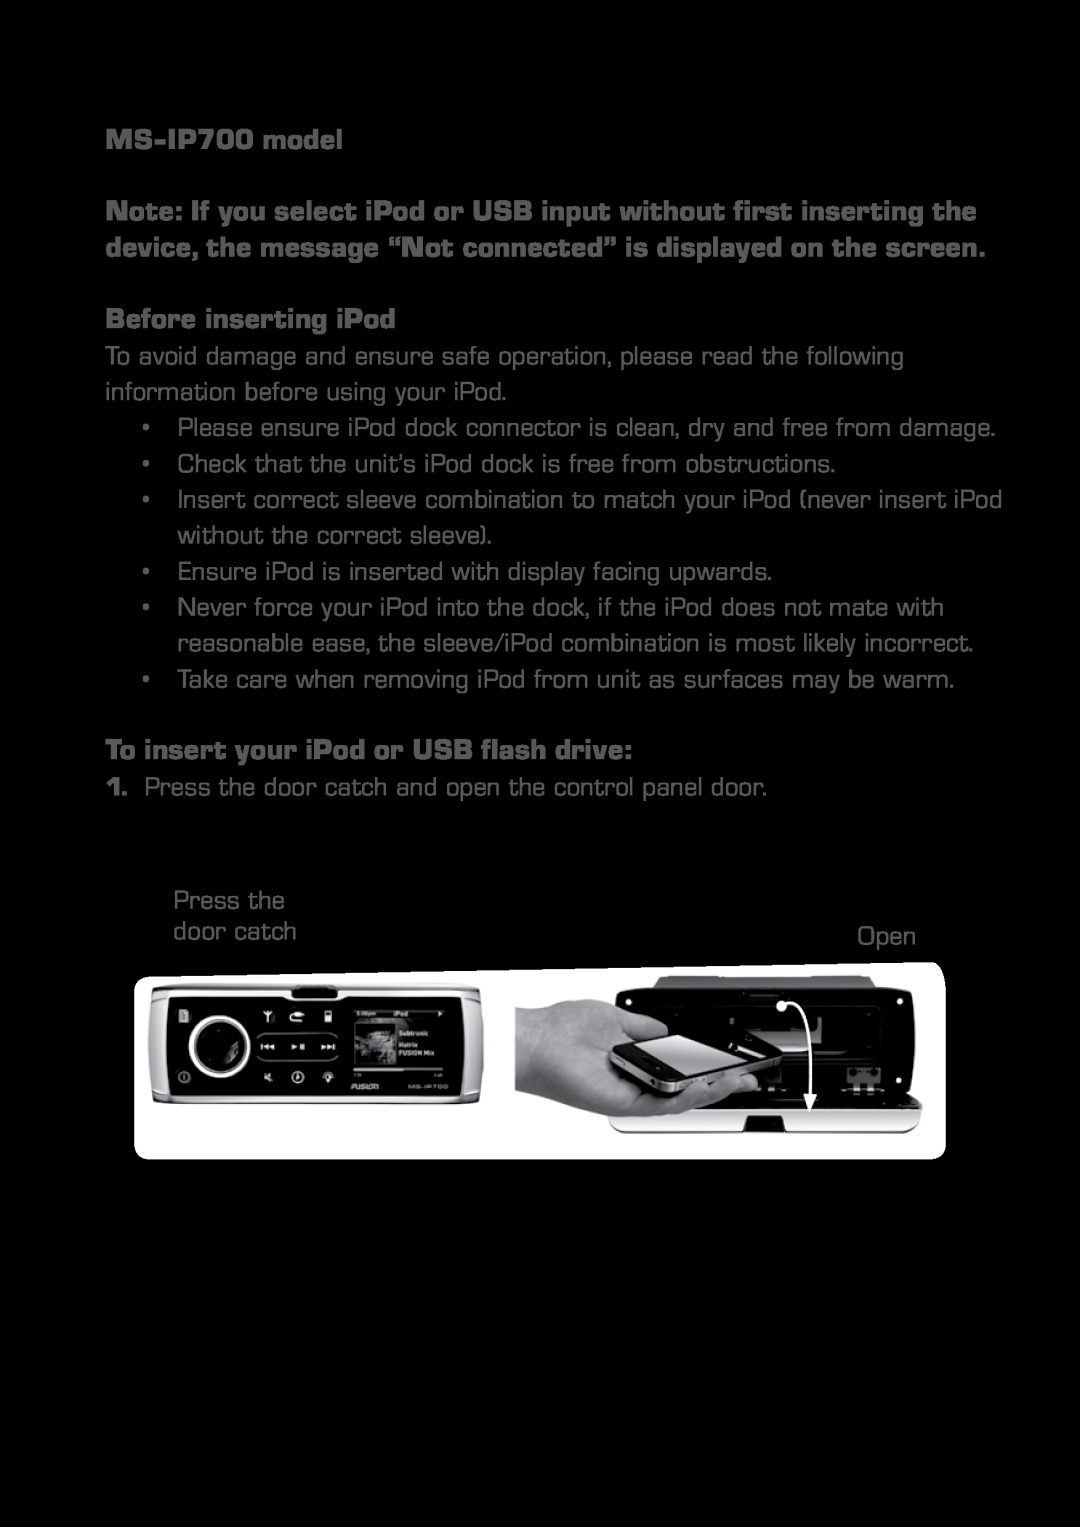 Fusion manual MS-IP700 model, Before inserting iPod, To insert your iPod or USB flash drive 